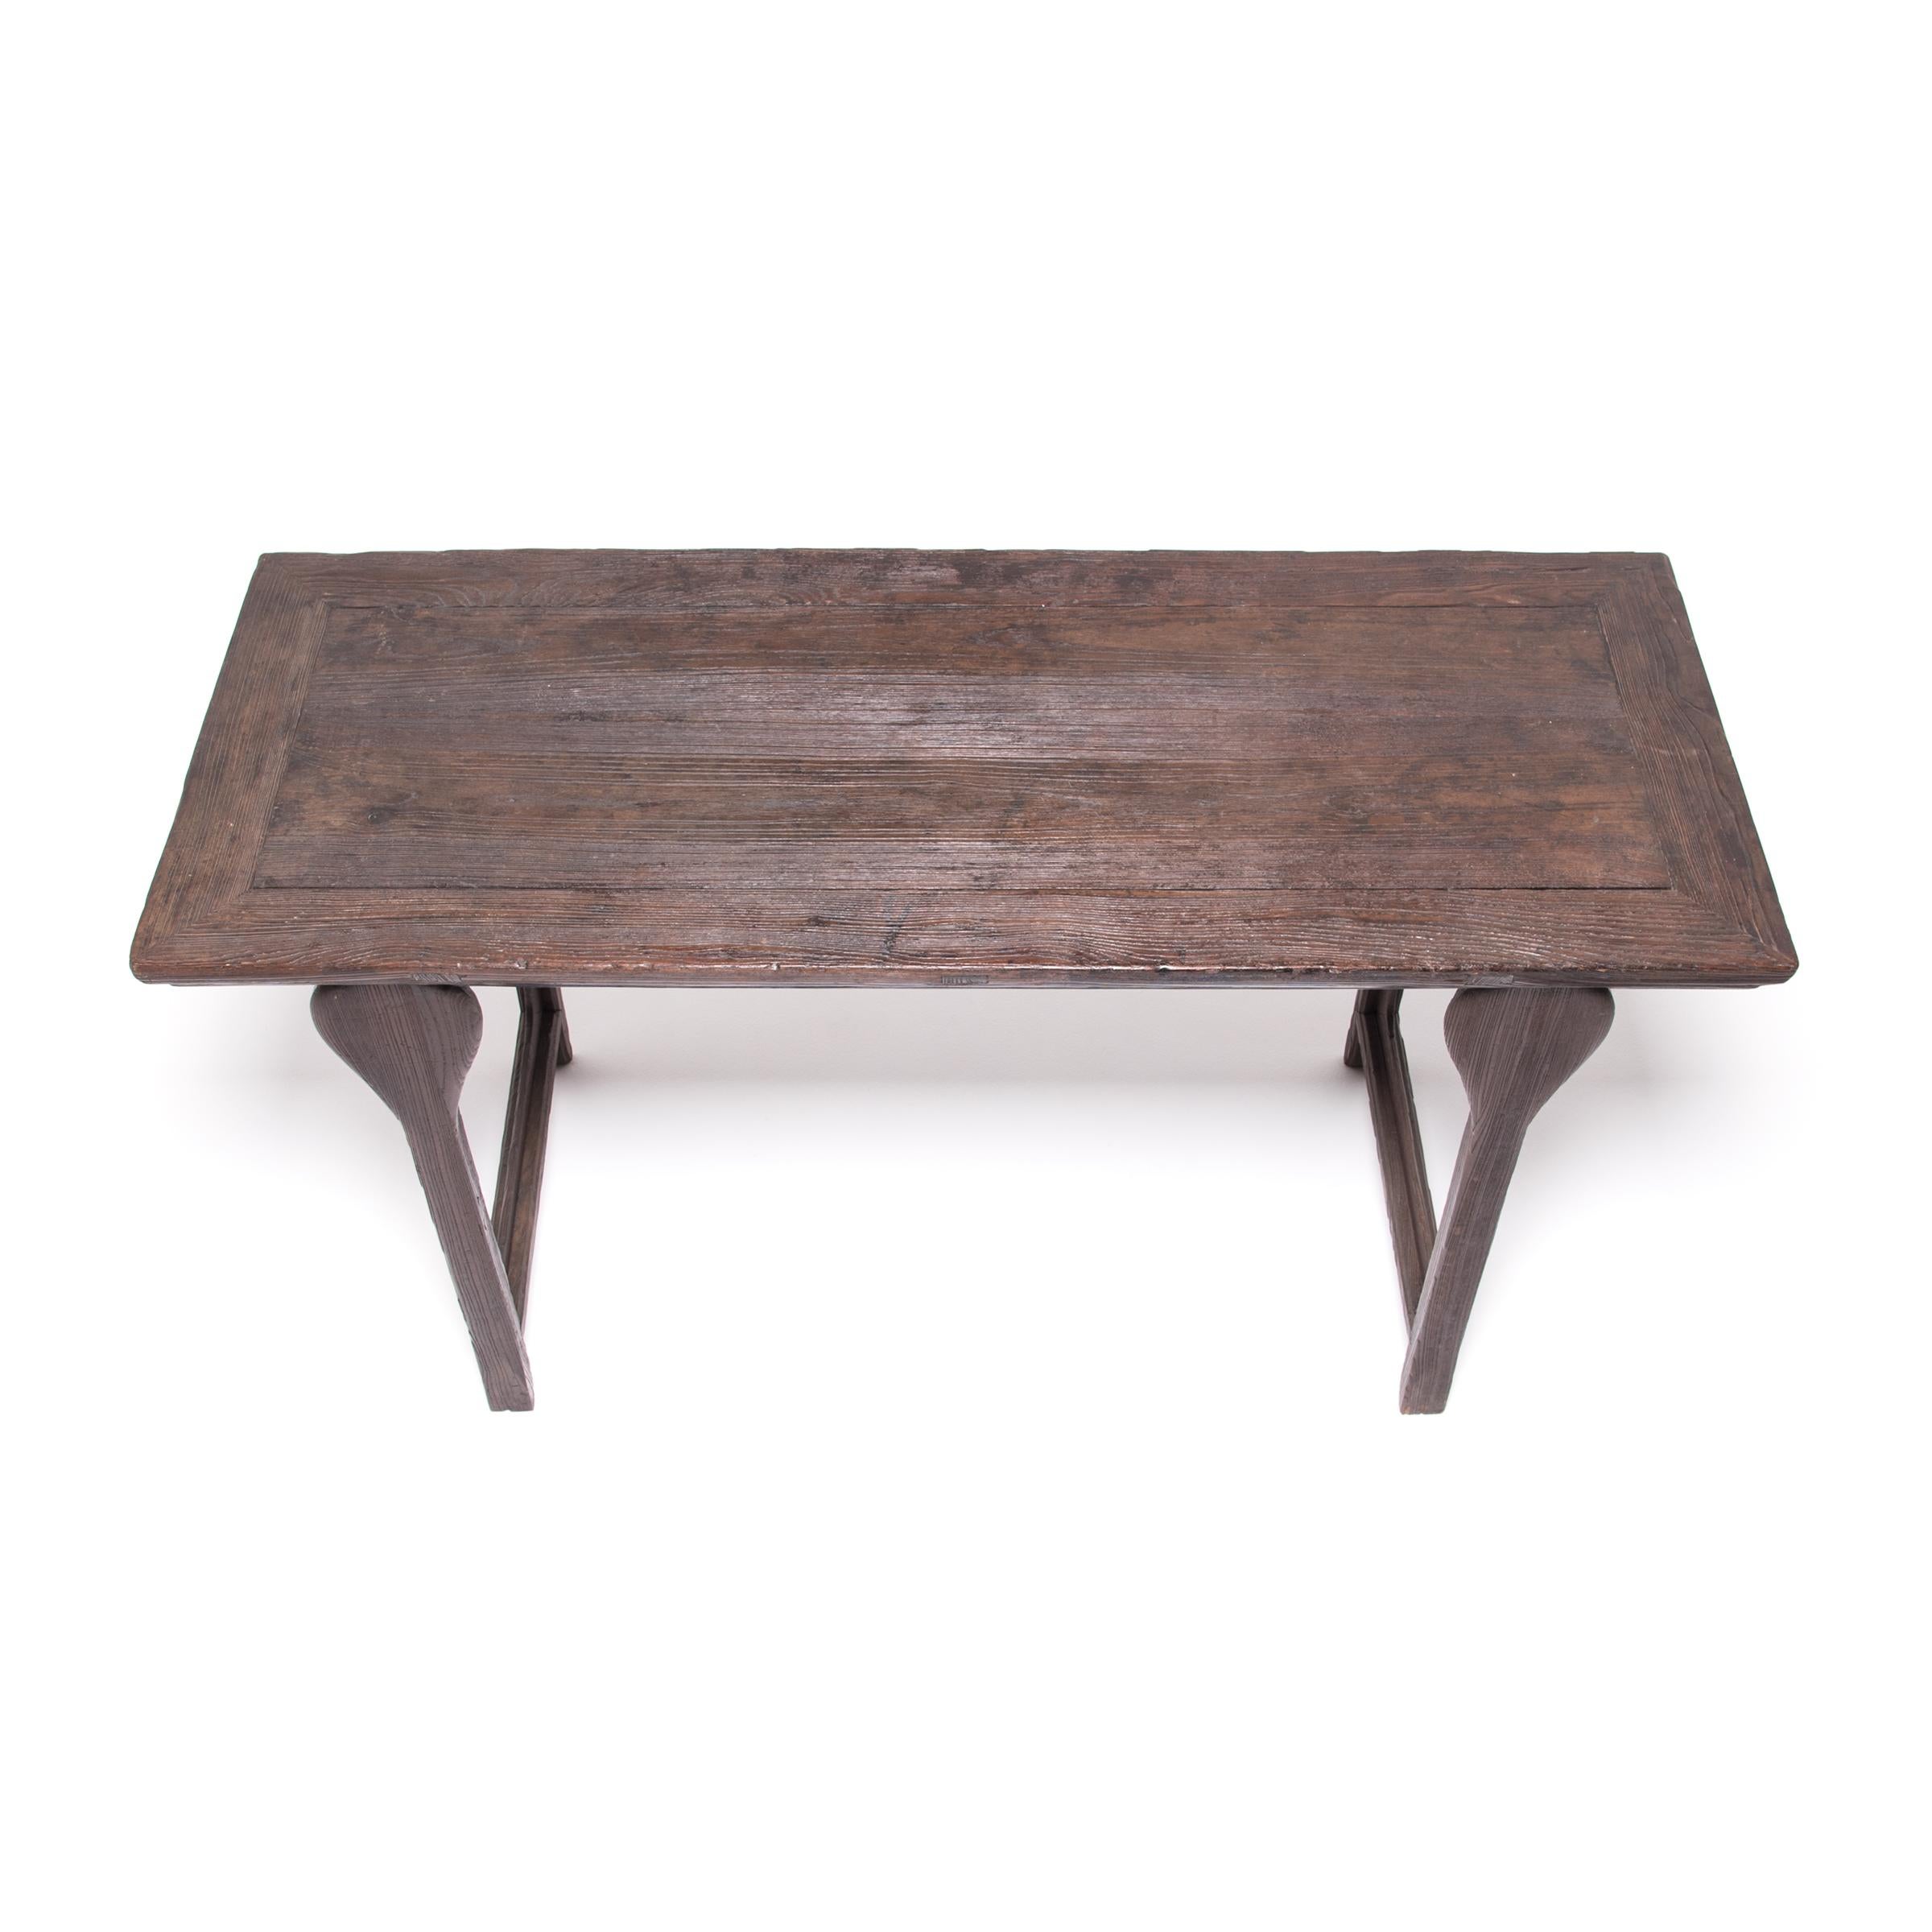 19th Century Chinese Ming Form Painting Table, c. 1800 For Sale